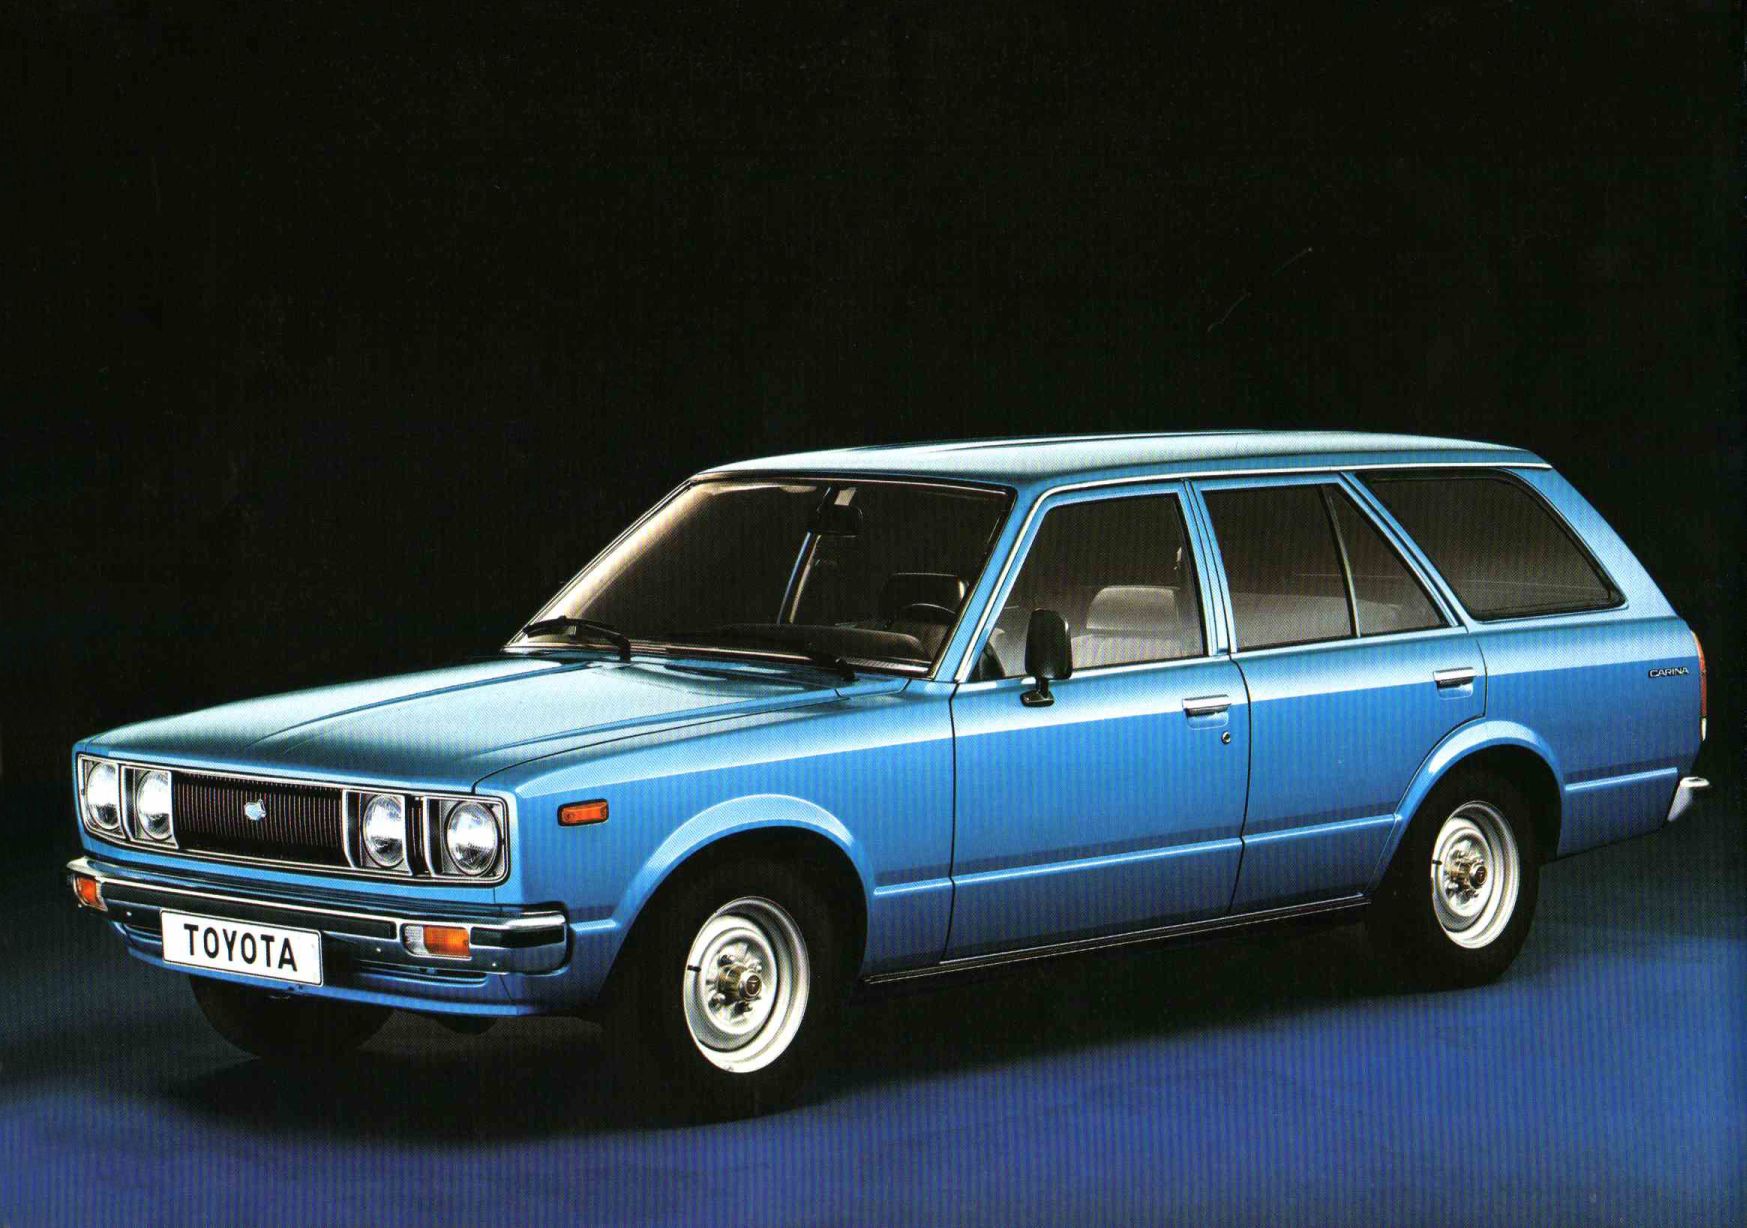 Toyota Carina 1977: Review, Amazing Pictures and Images – Look at the car